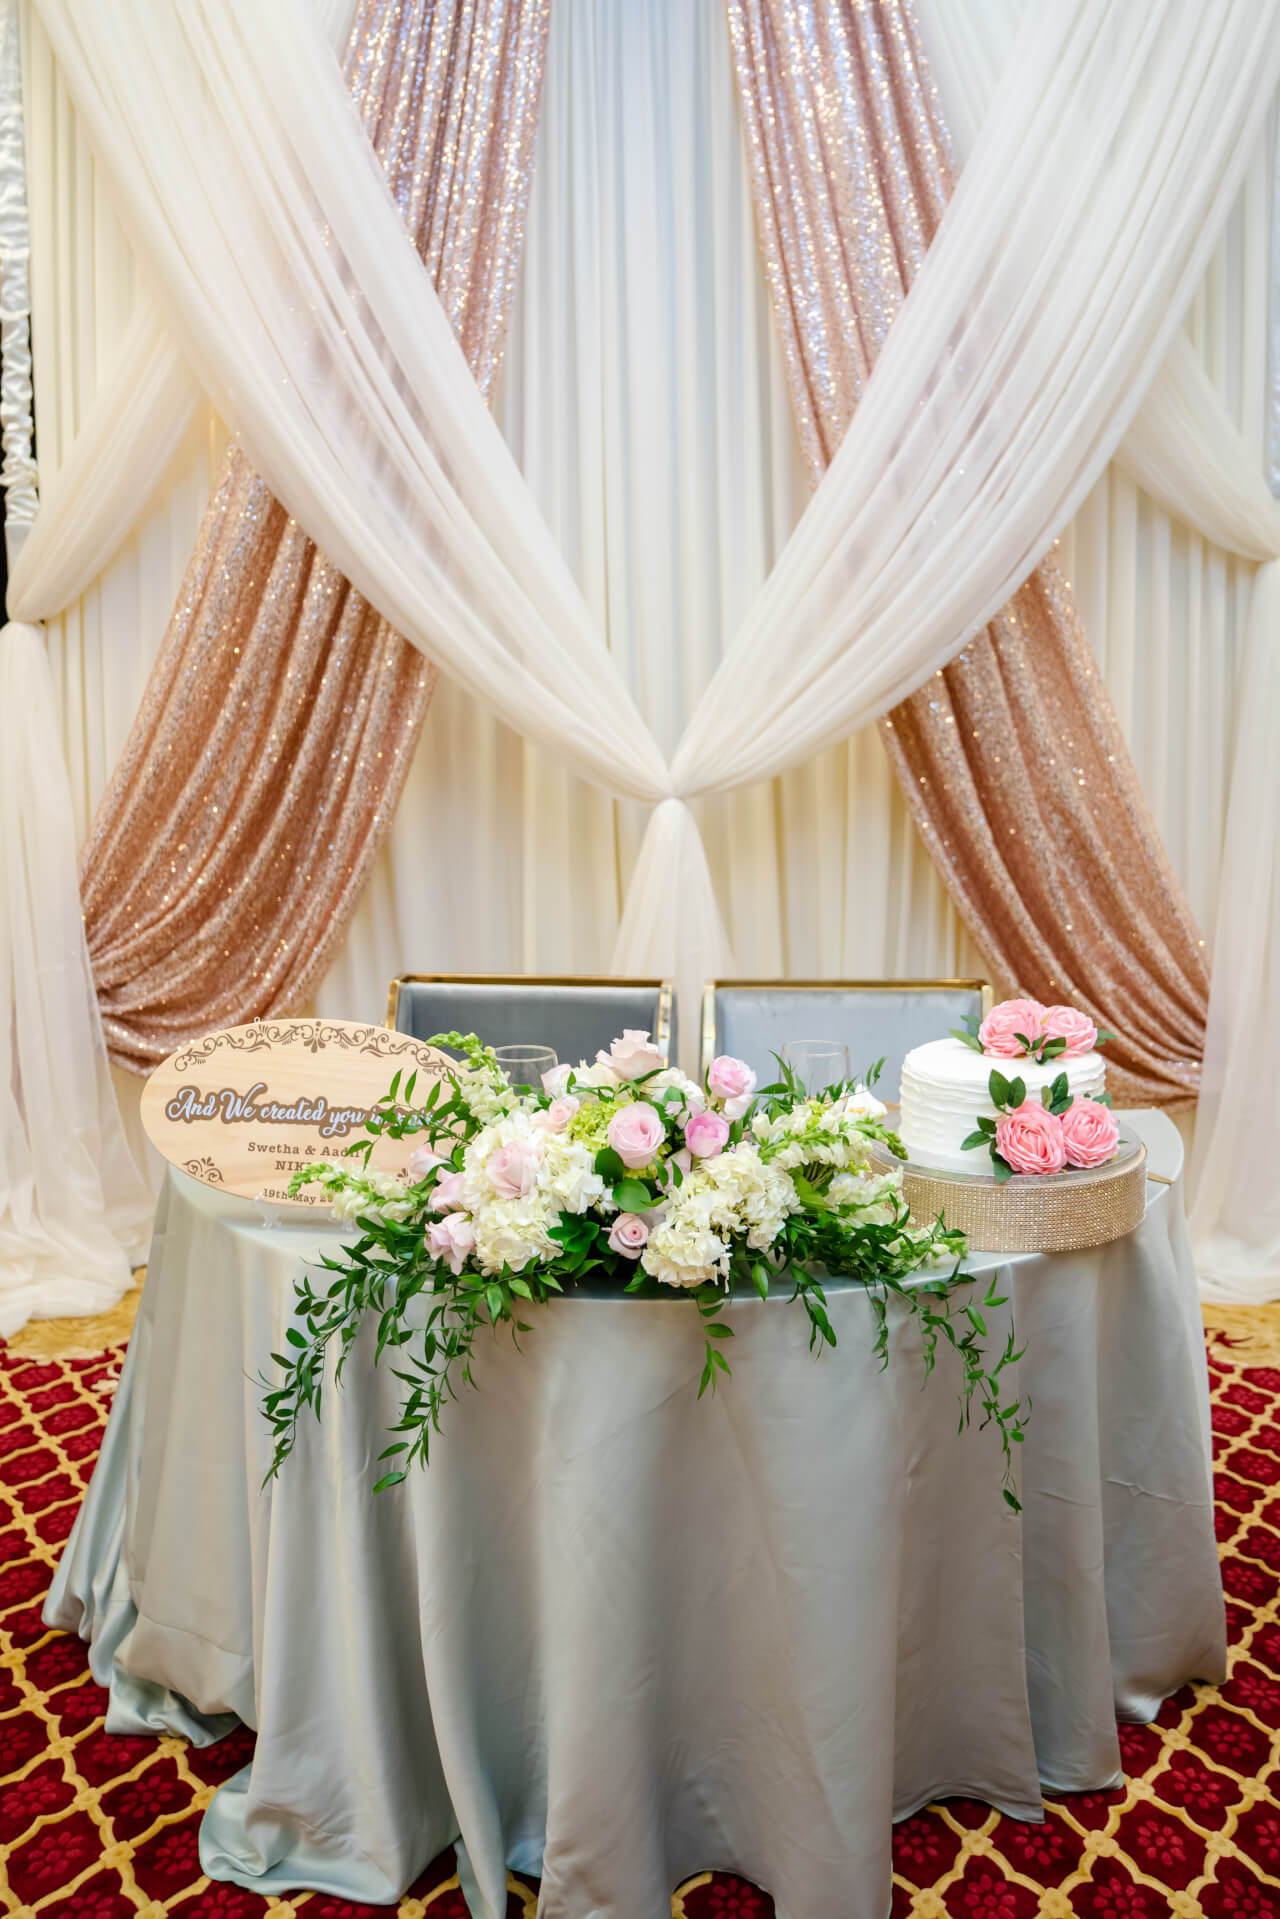 a photograph of the cake cutting ceremony at our mosque wedding ceremonies